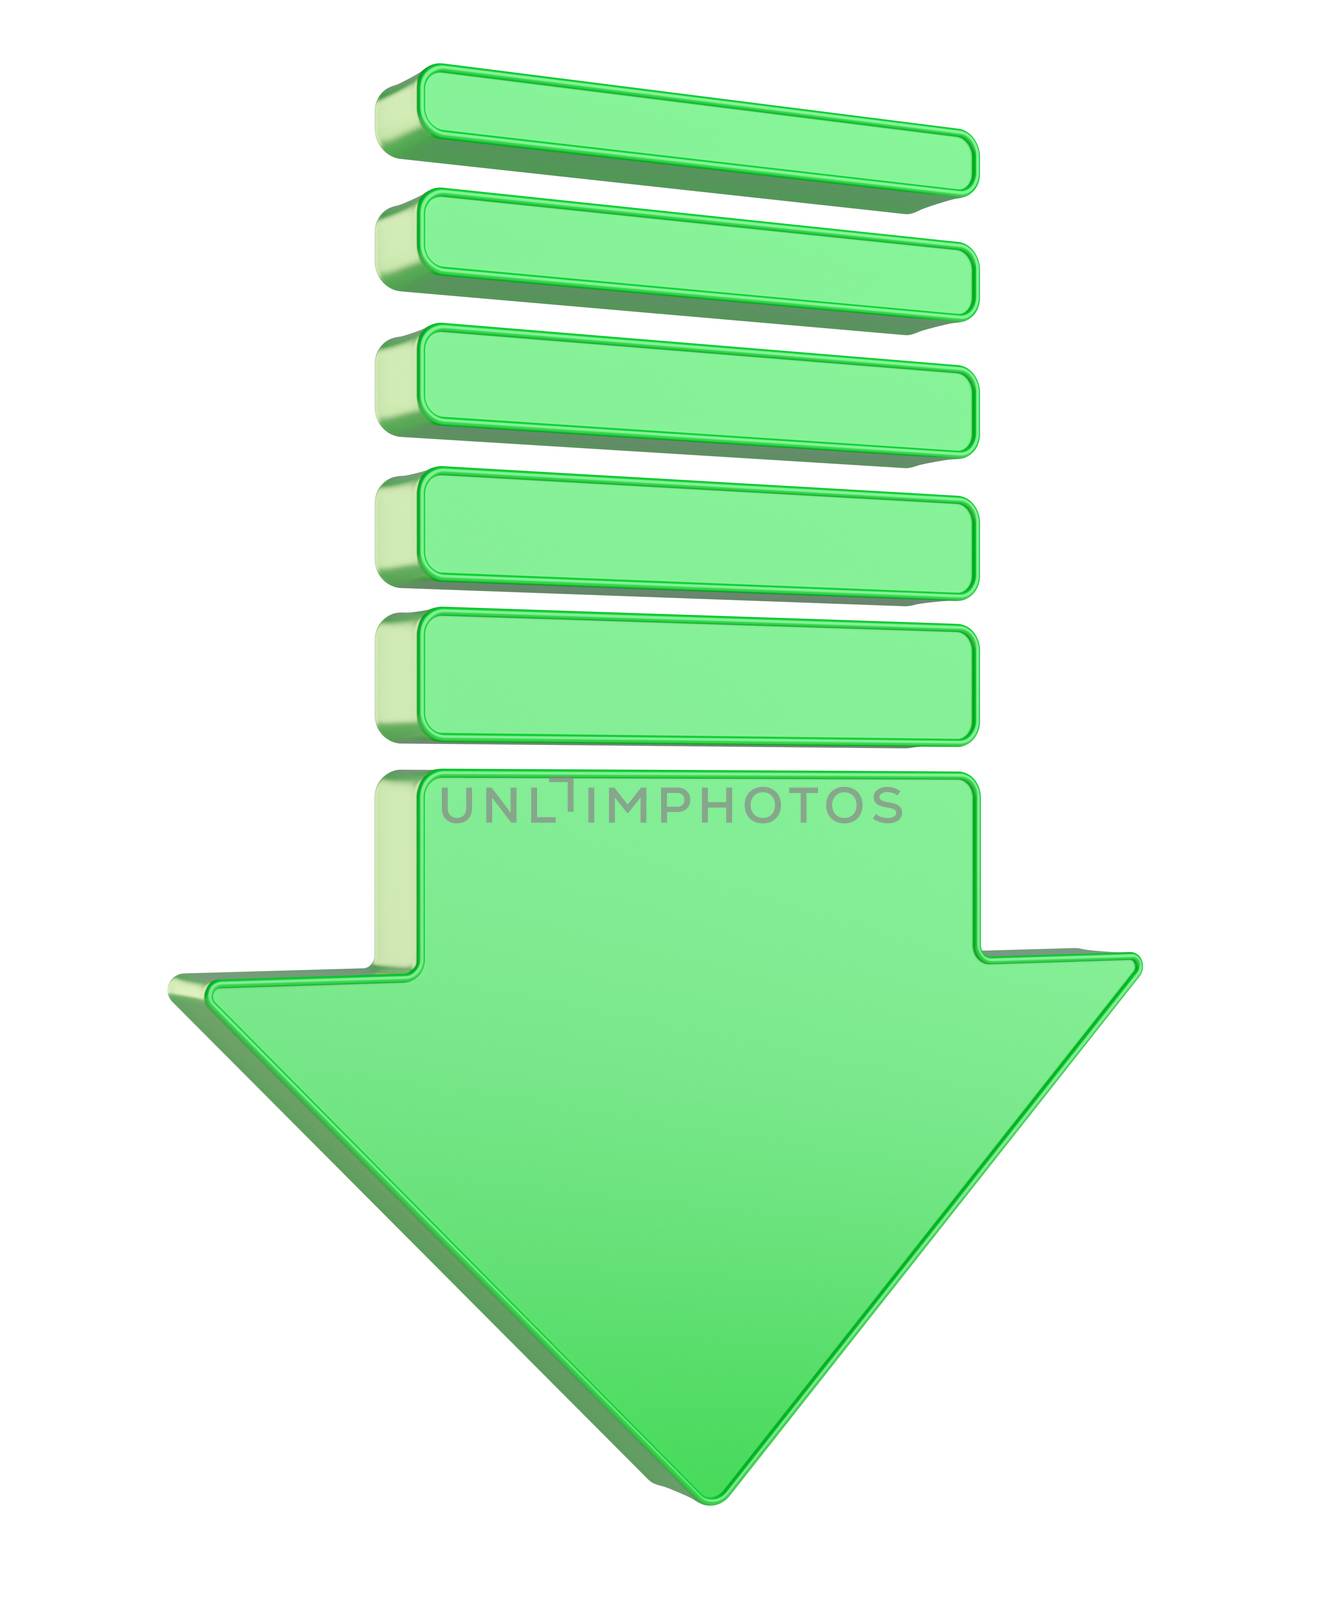 Green Down Arrow isolated on white background. 3D Illustration